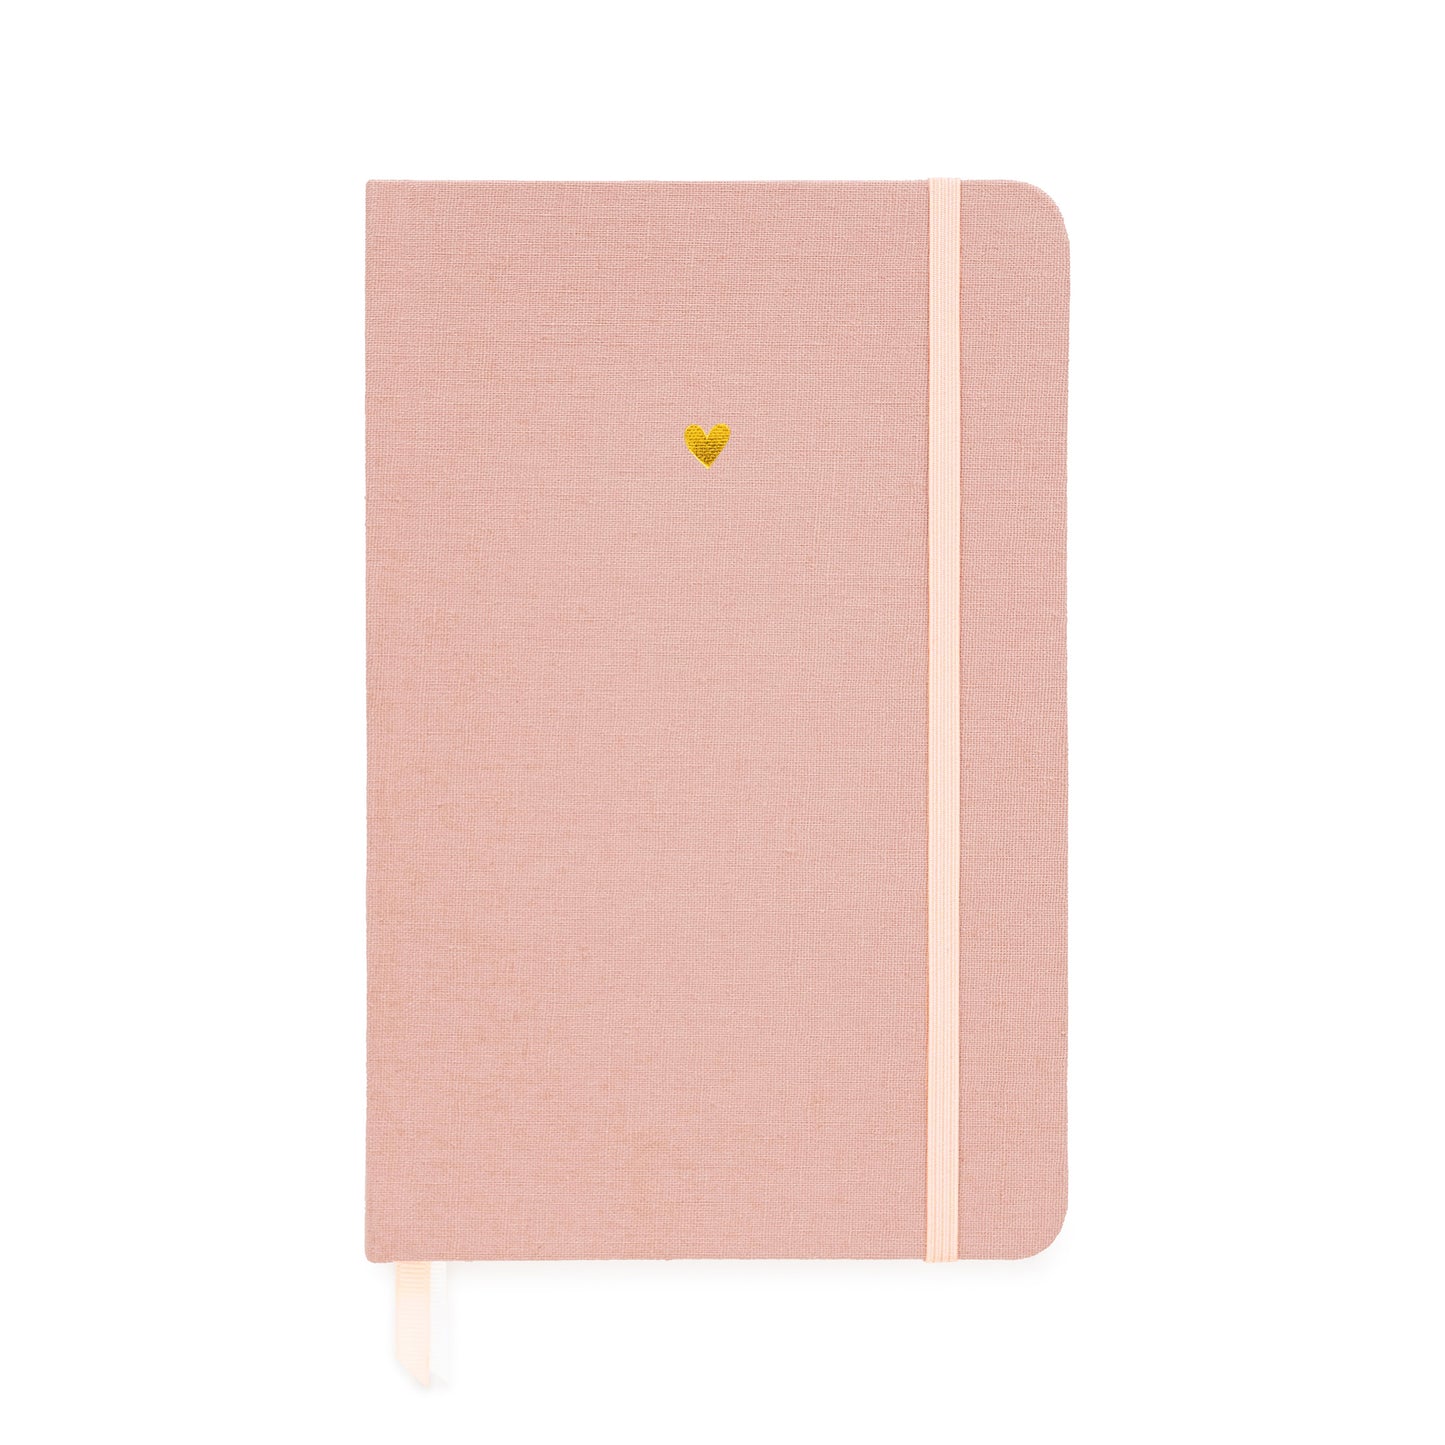 Rose linen journal with foil stamped gold heart